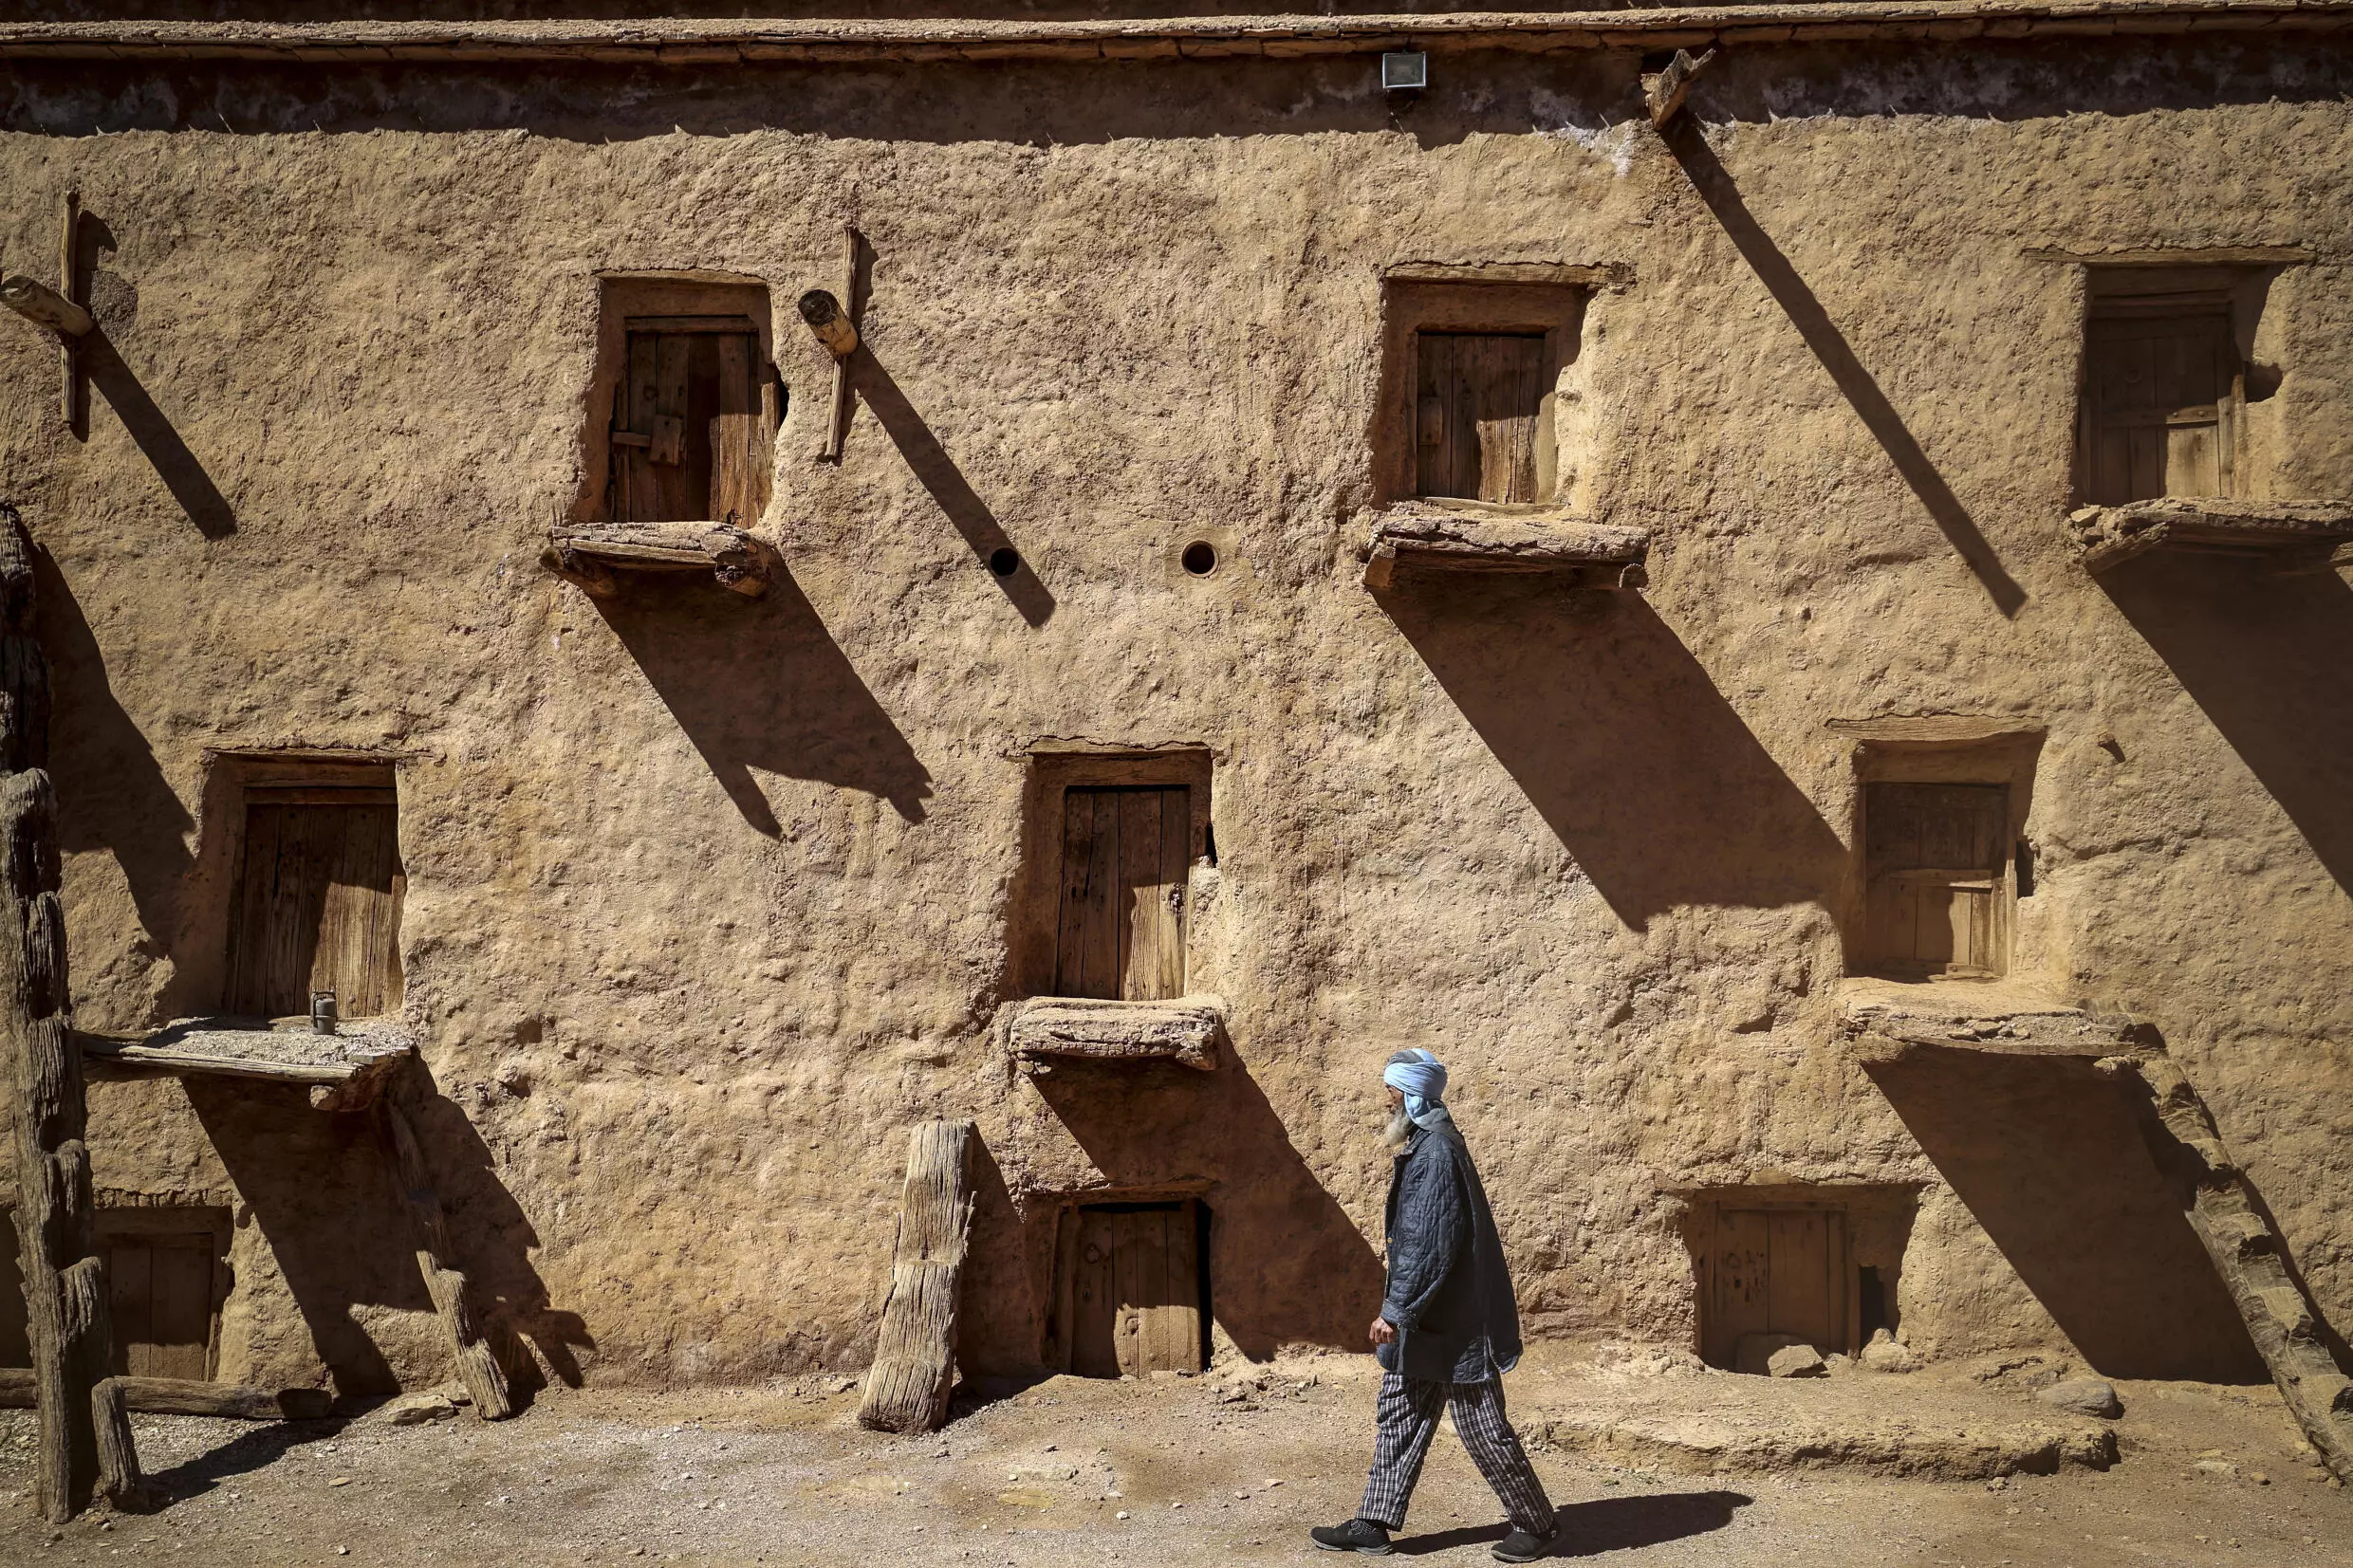 The agadir has stocks of barley, dates and almonds, but it is also used to safeguard documents like marriage and birth certificates and religious texts. Photo: AFP